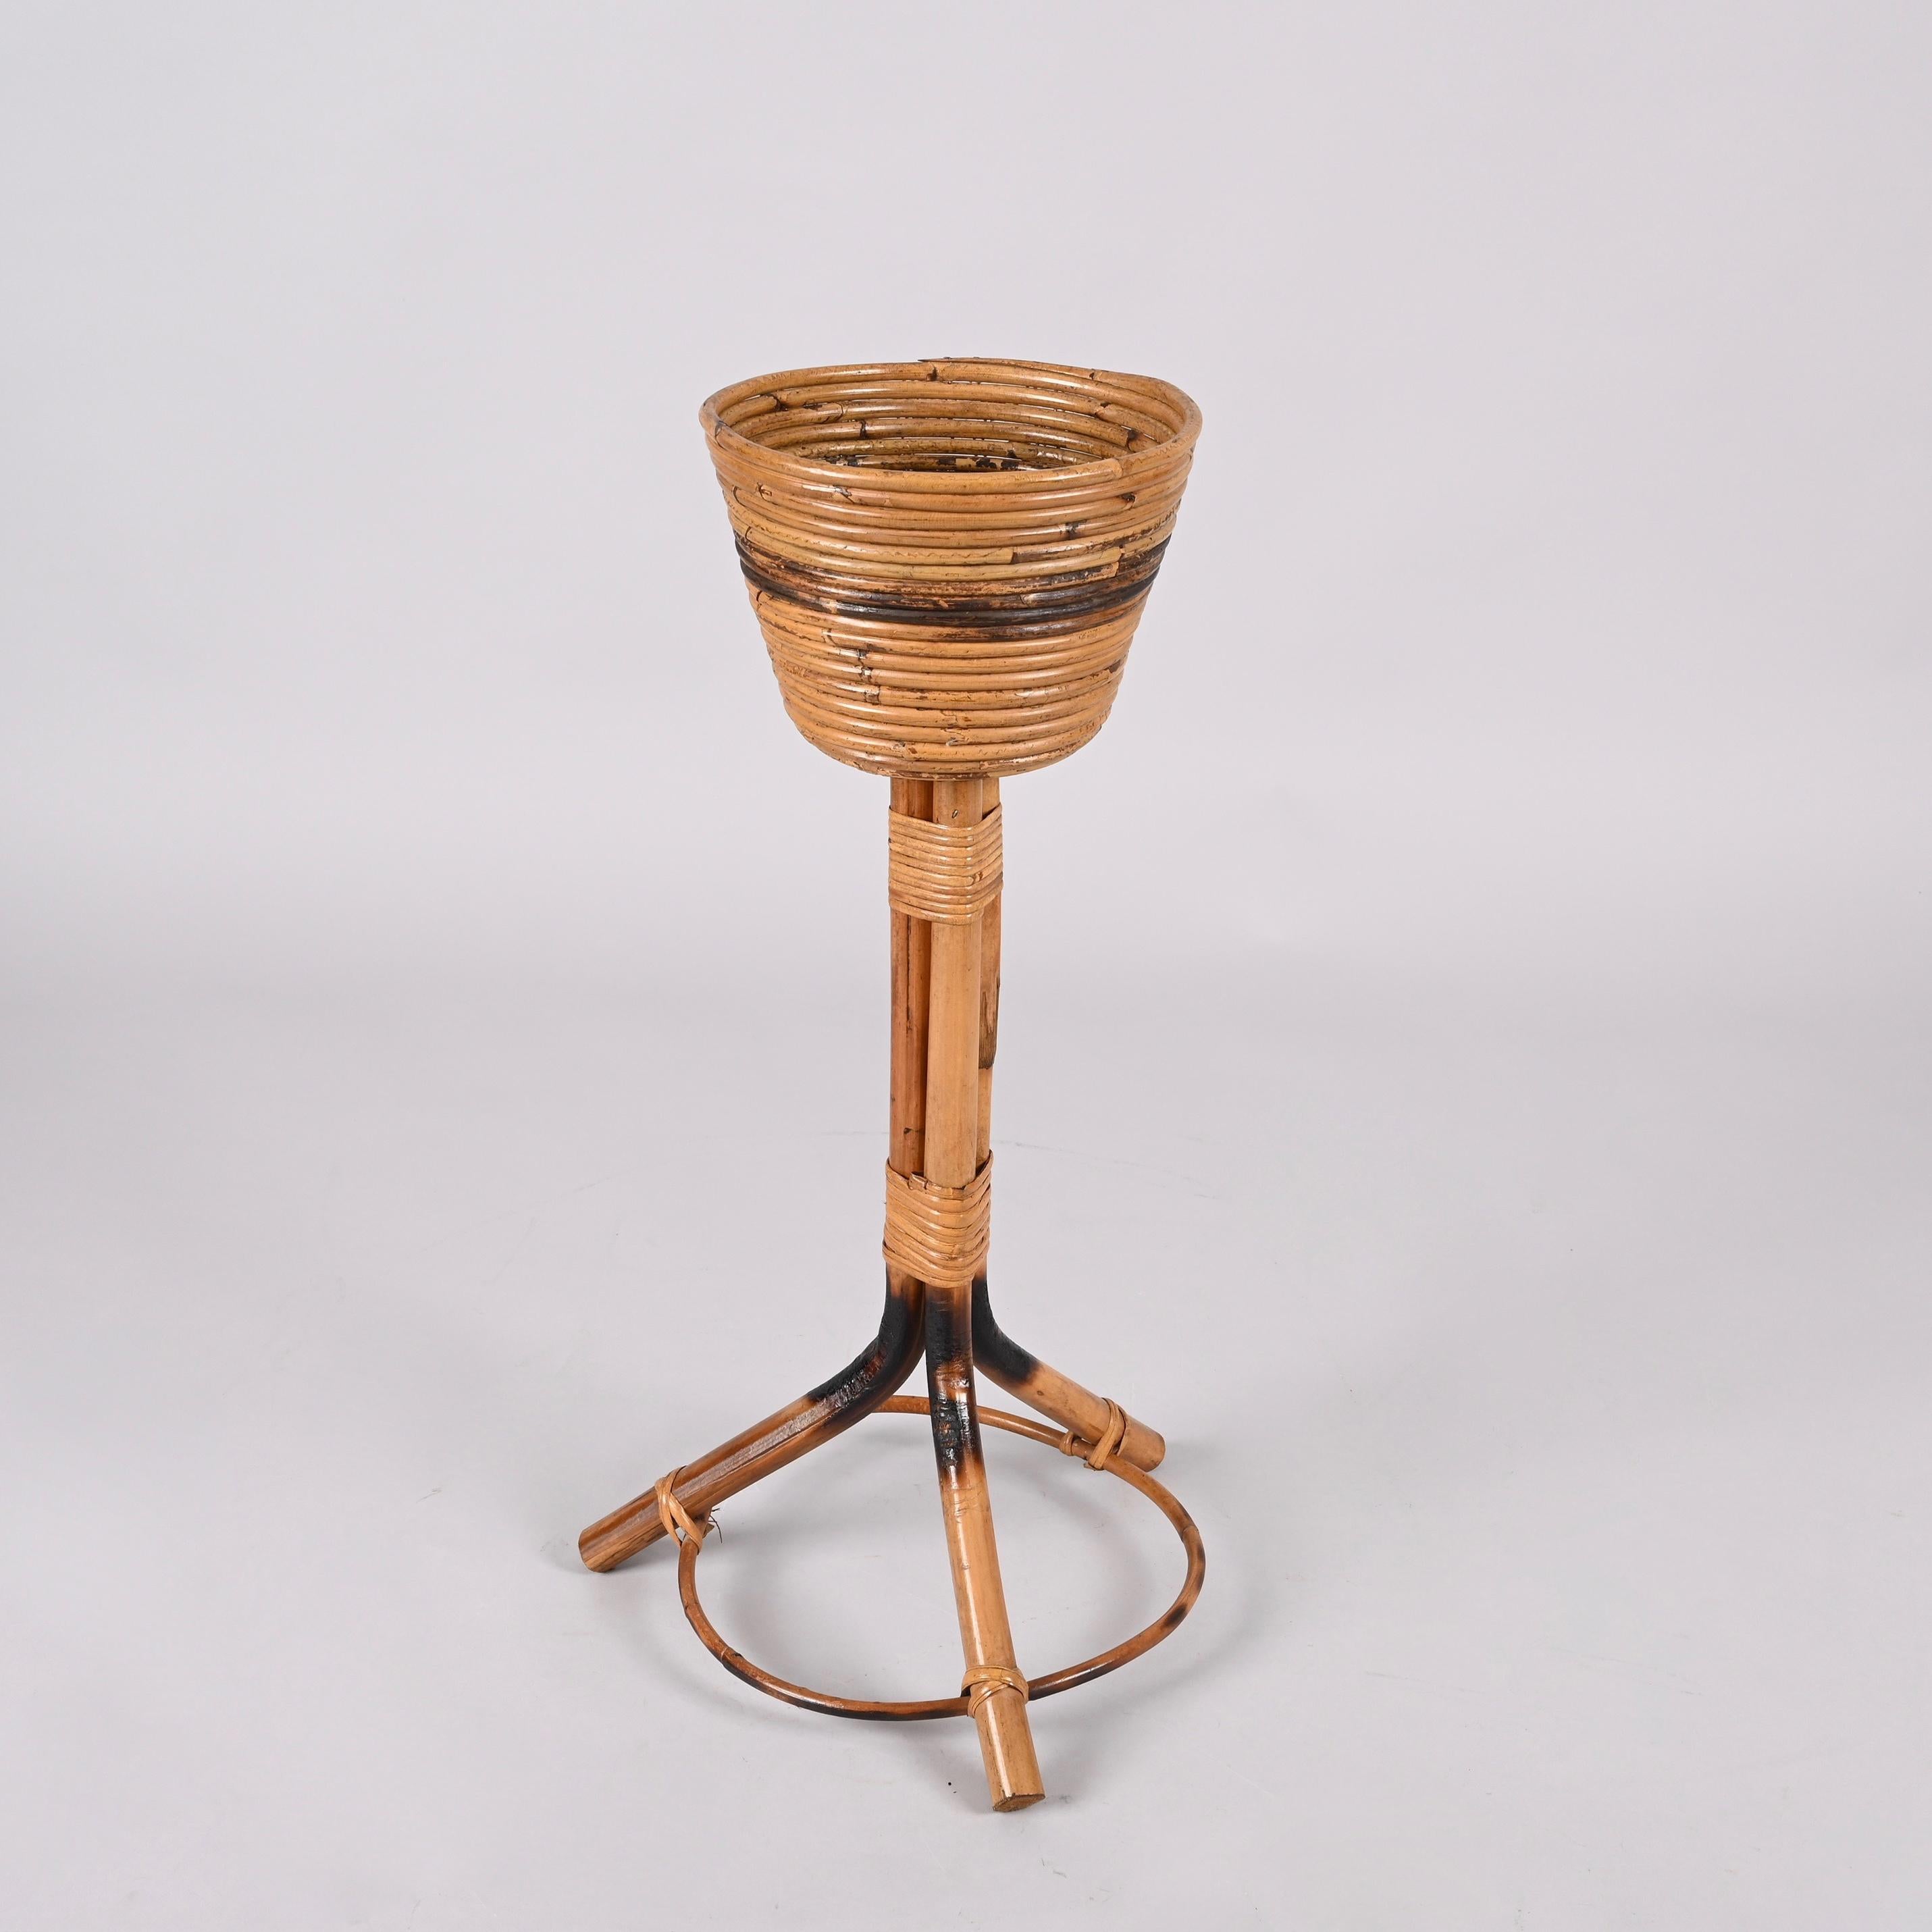 Midcentury Italian Bamboo Cane and Rattan Round Plant Holder, 1950s For Sale 7